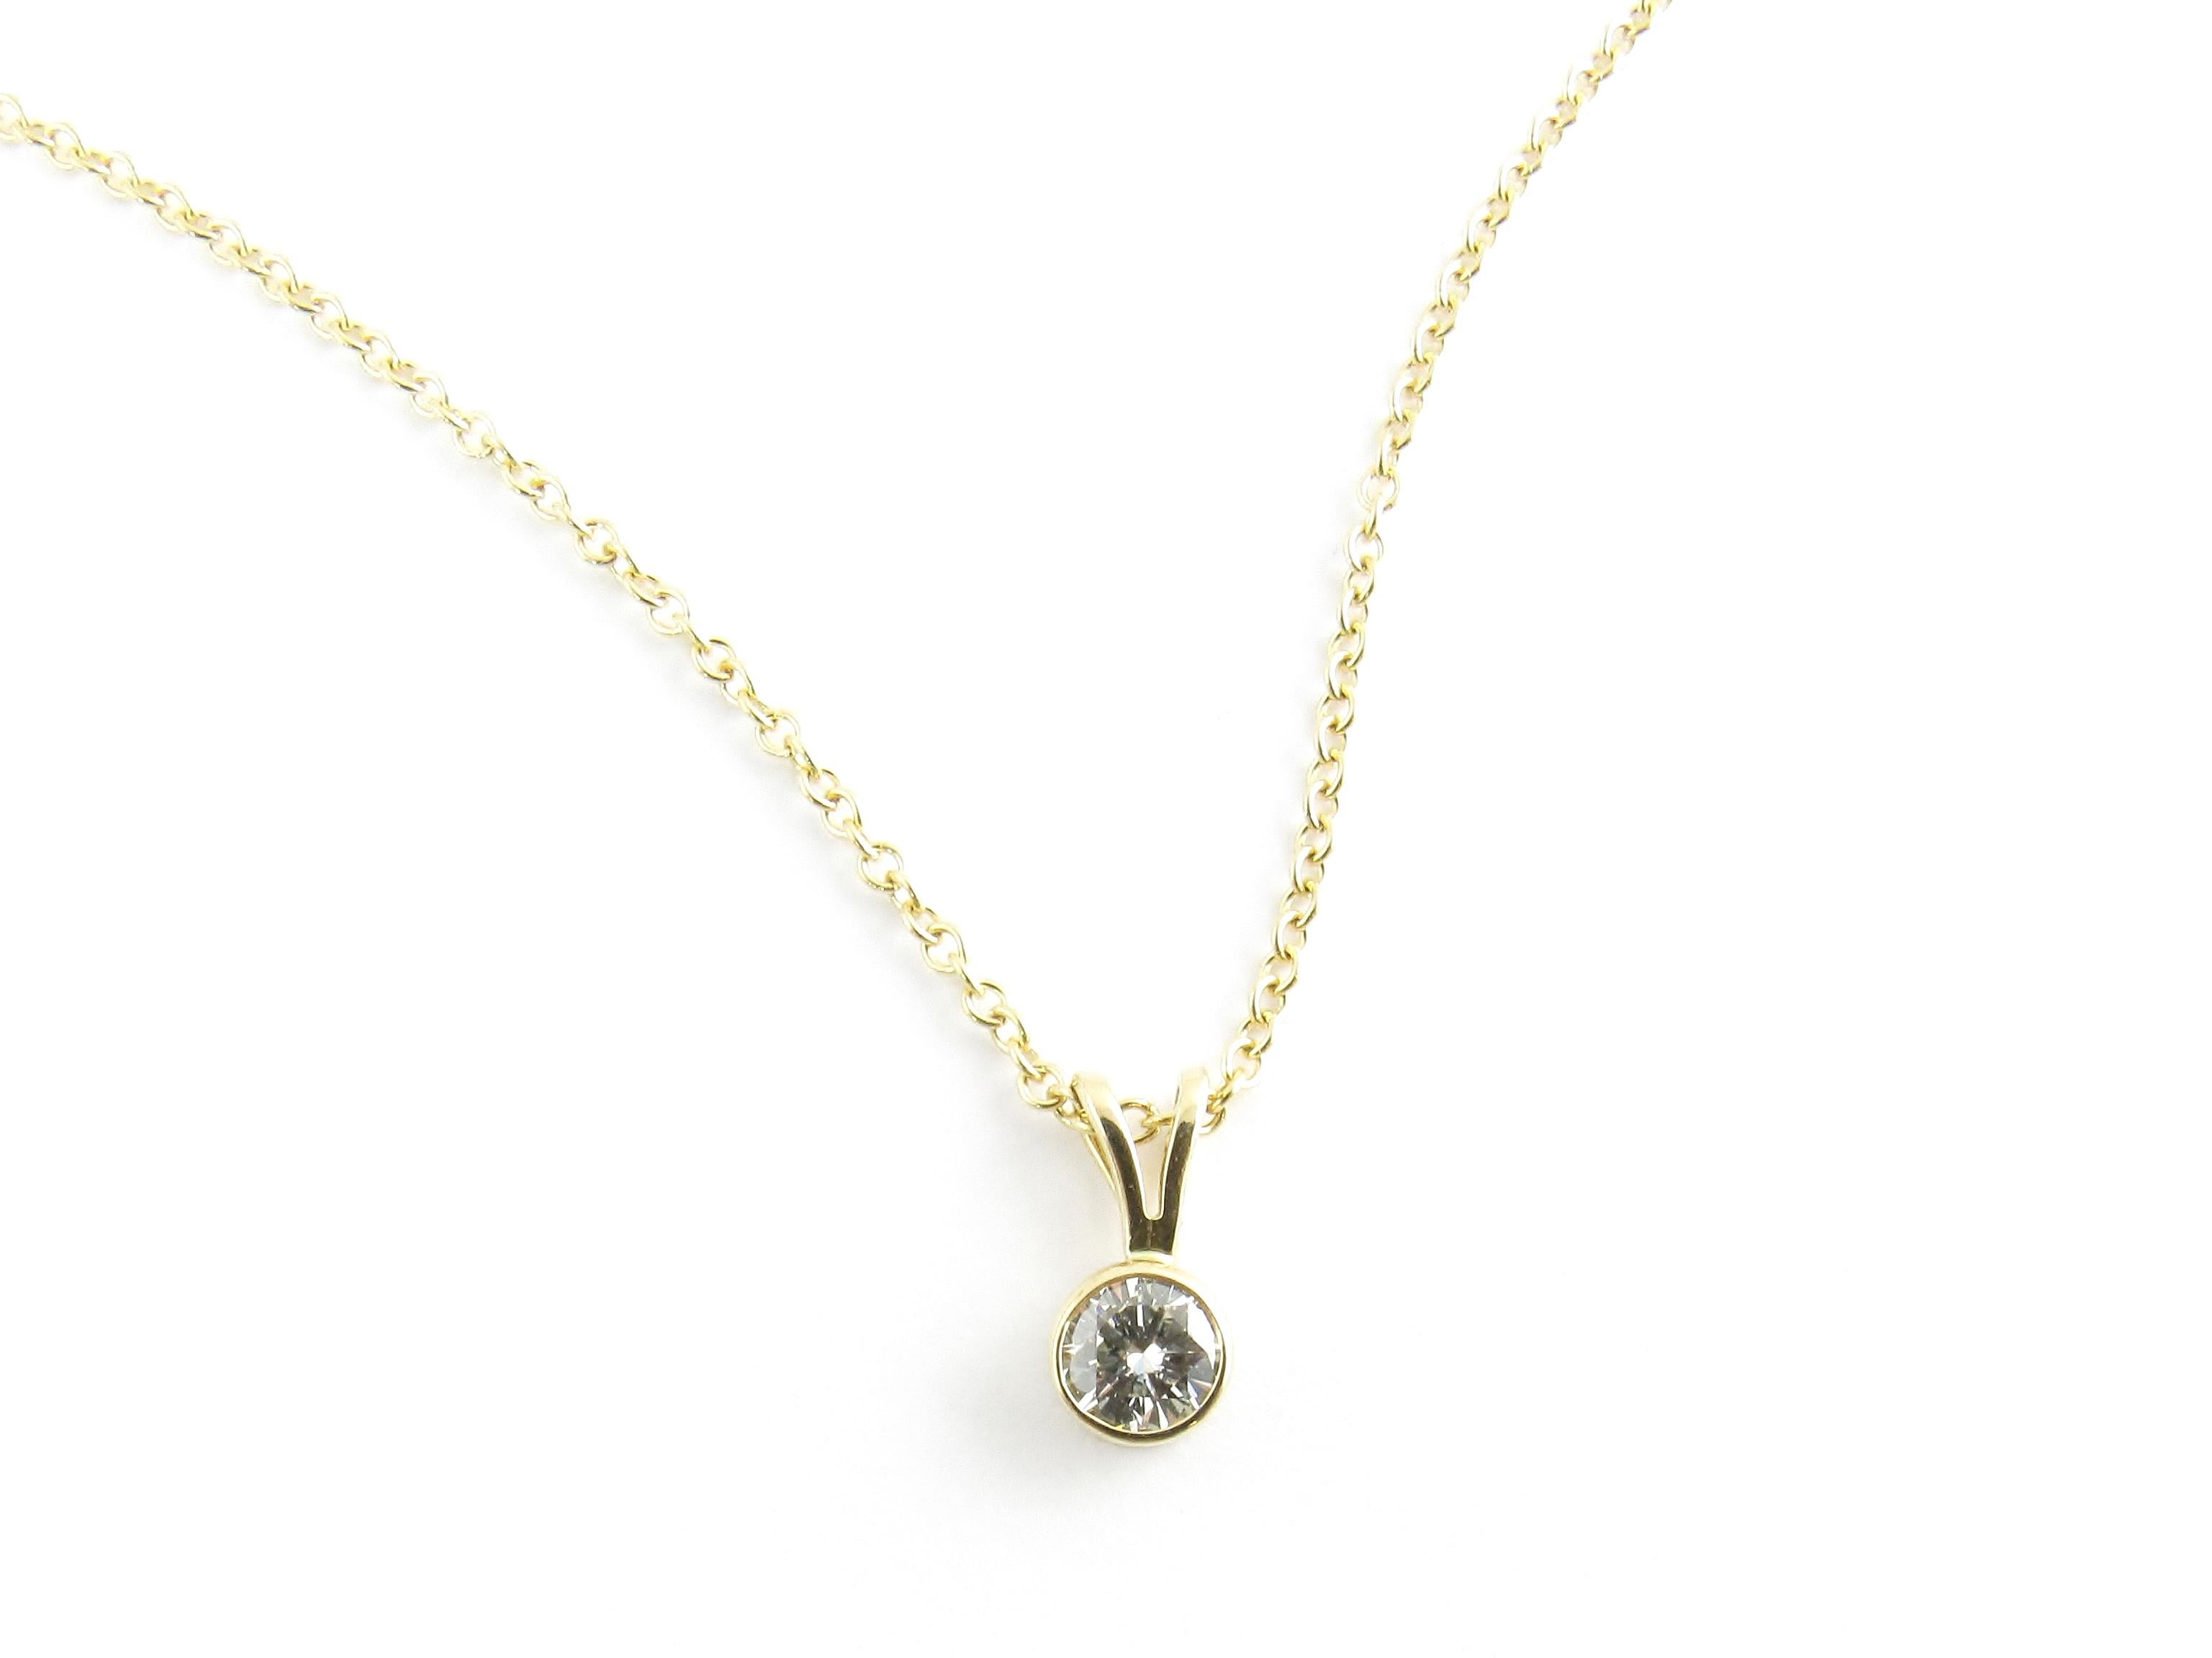 Vintage 14 Karat Yellow Gold Diamond Pendant Necklace

This sparkling round brilliant cut diamond pendant is bezel set in 14K yellow gold. Suspends from a classic yellow gold necklace.

Approximate total diamond weight: .40 ct.

Diamond color: